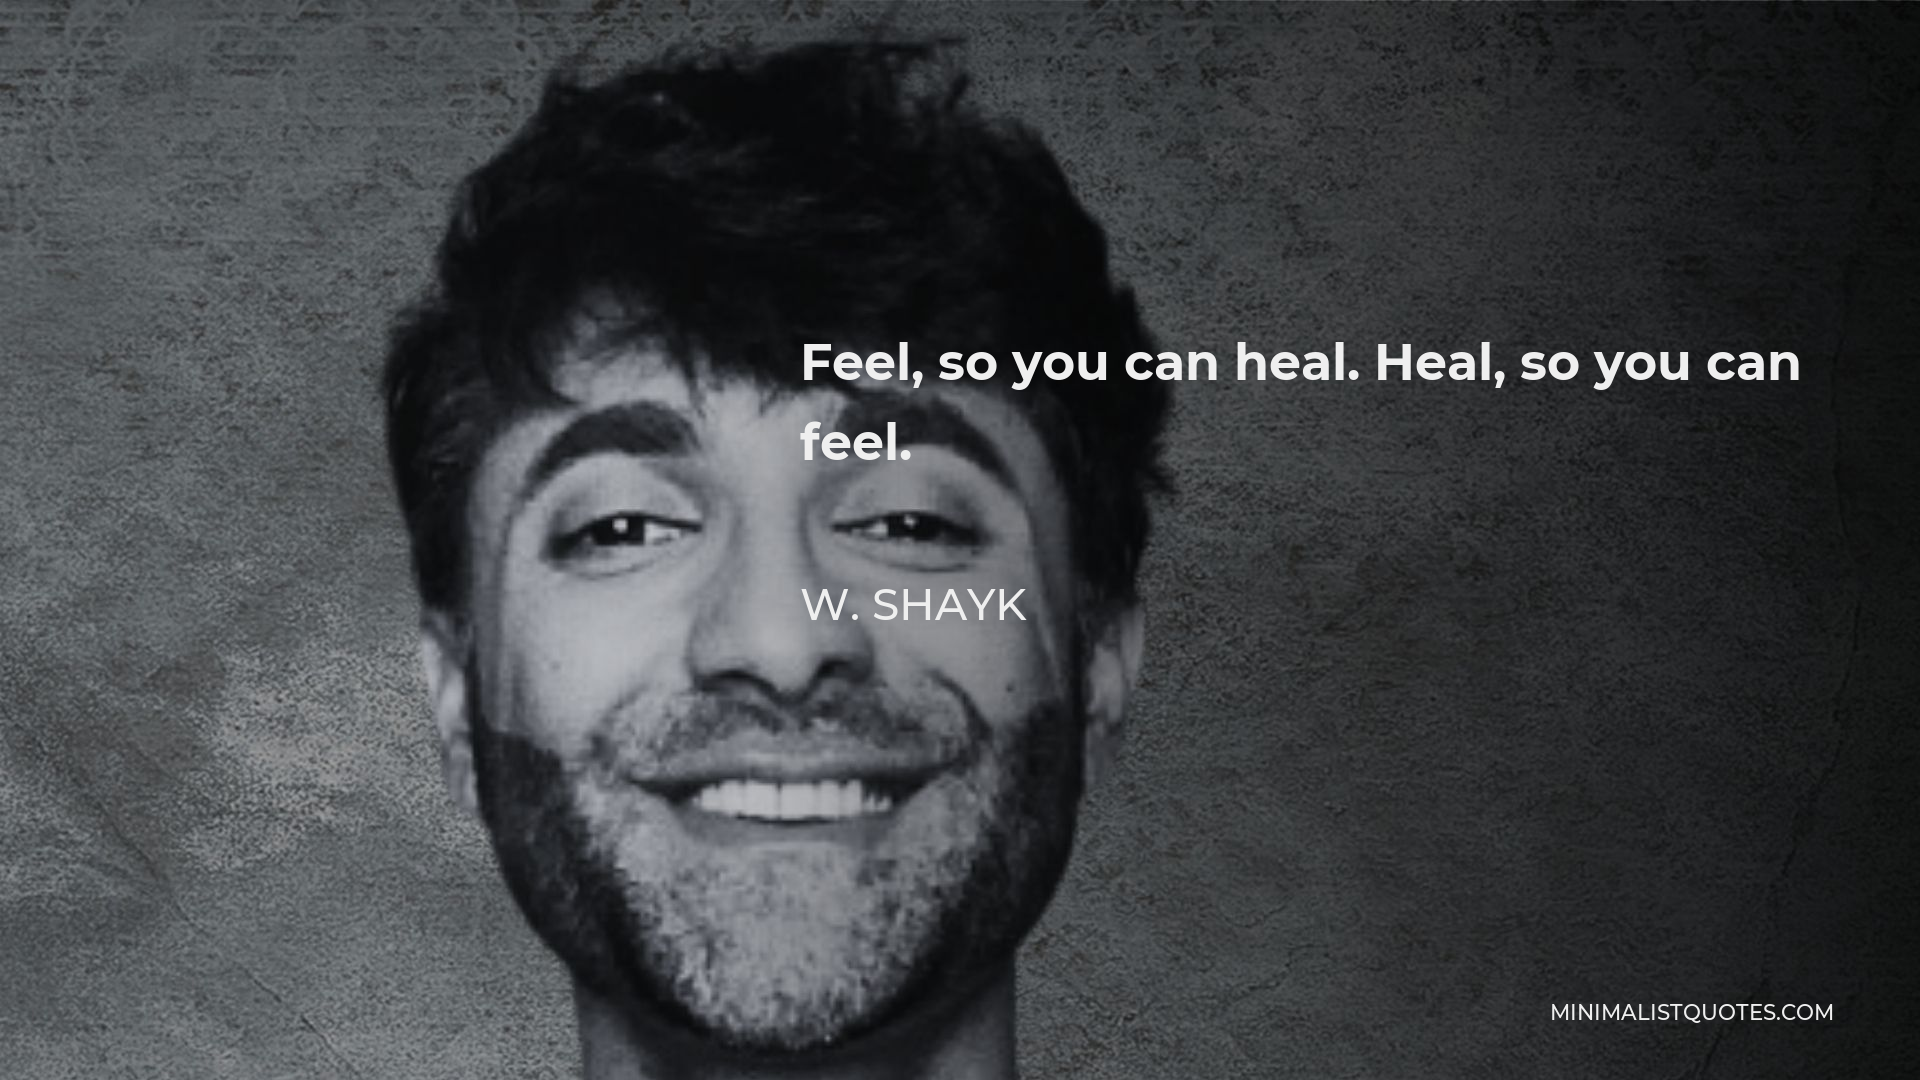 W. Shayk Quote - Feel, so you can heal. Heal, so you can feel.